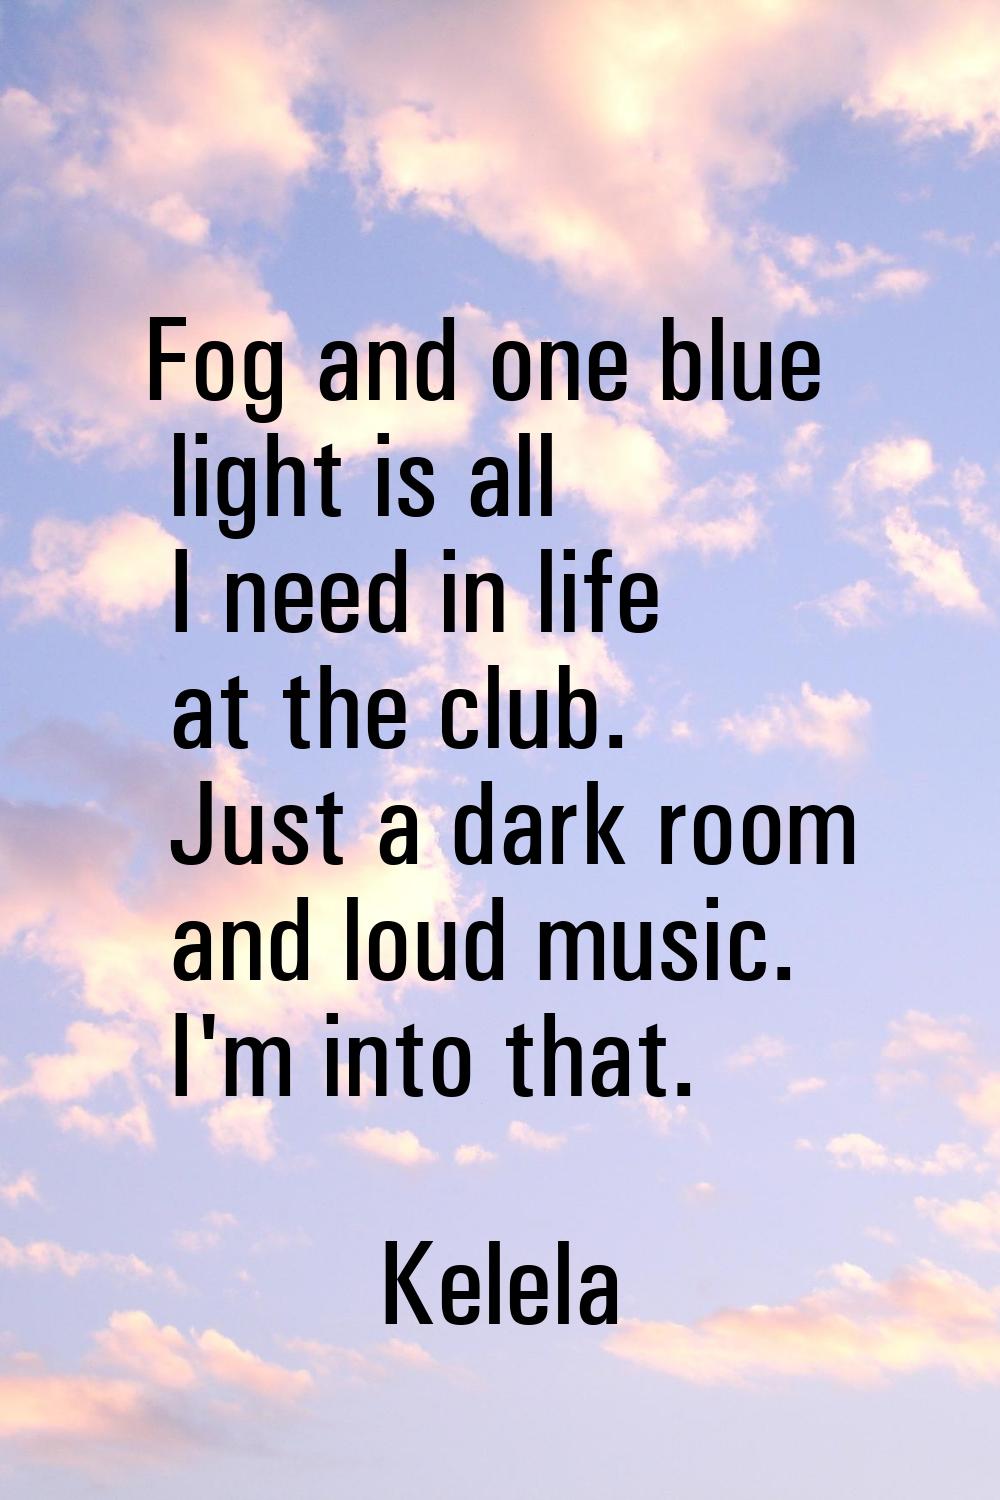 Fog and one blue light is all I need in life at the club. Just a dark room and loud music. I'm into